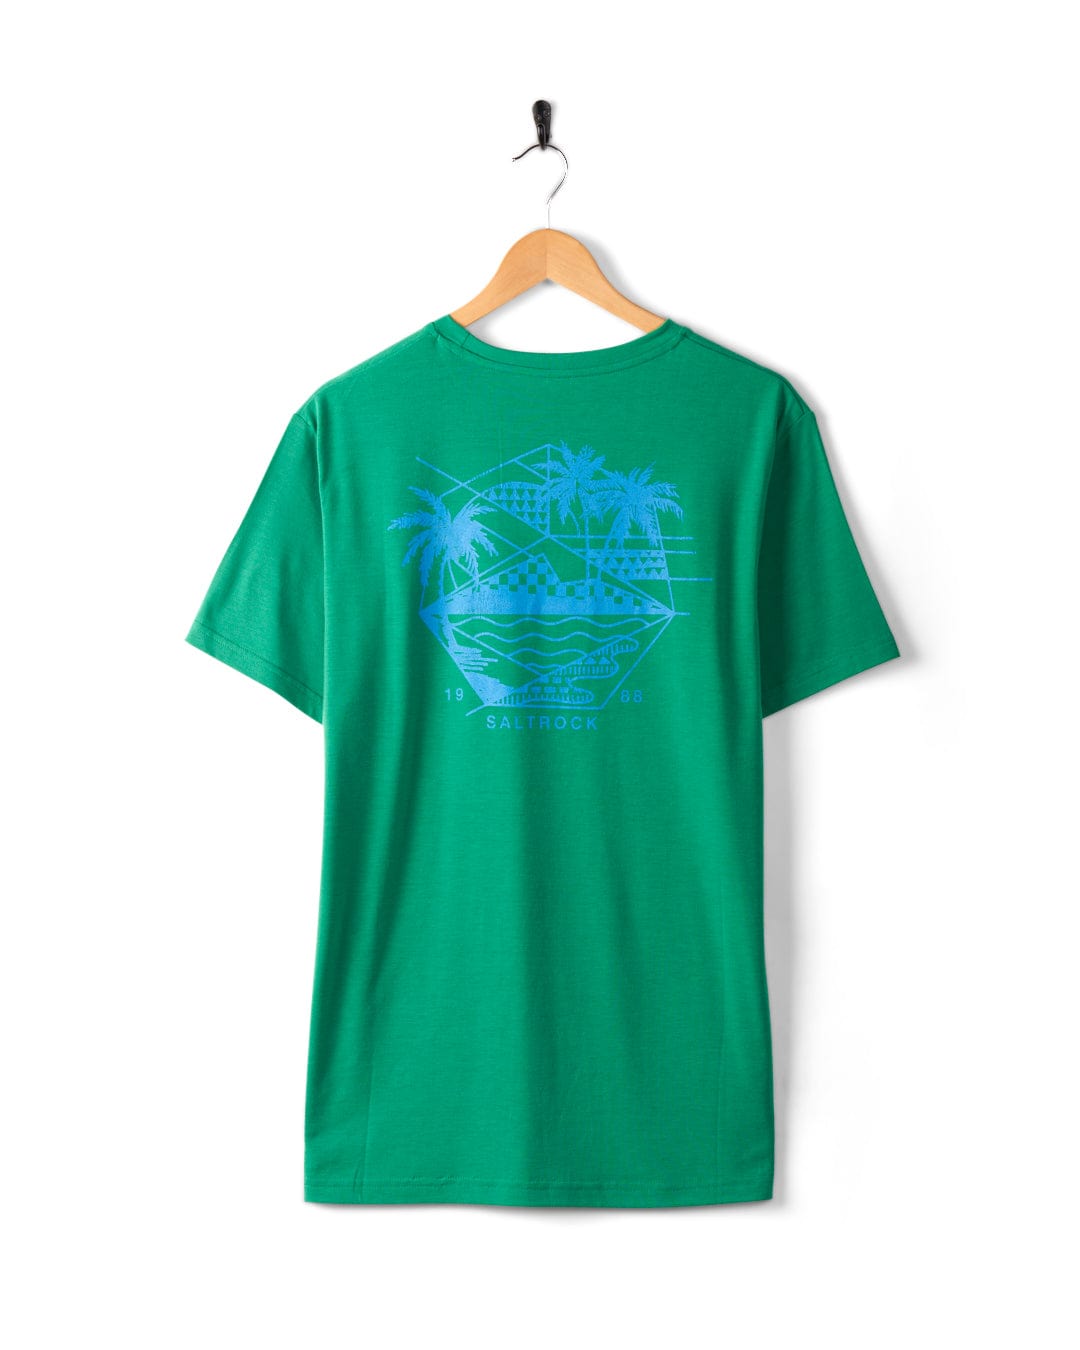 Saltrock's Geo Palms Solid - Mens Recycled Hybrid T-Shirt - Green with blue palm beach graphics featuring a beach scene, including palm trees and waves, hanging on a wooden hanger against a white background. The cotton soft hand feel of the recycled material enhances its comfort.